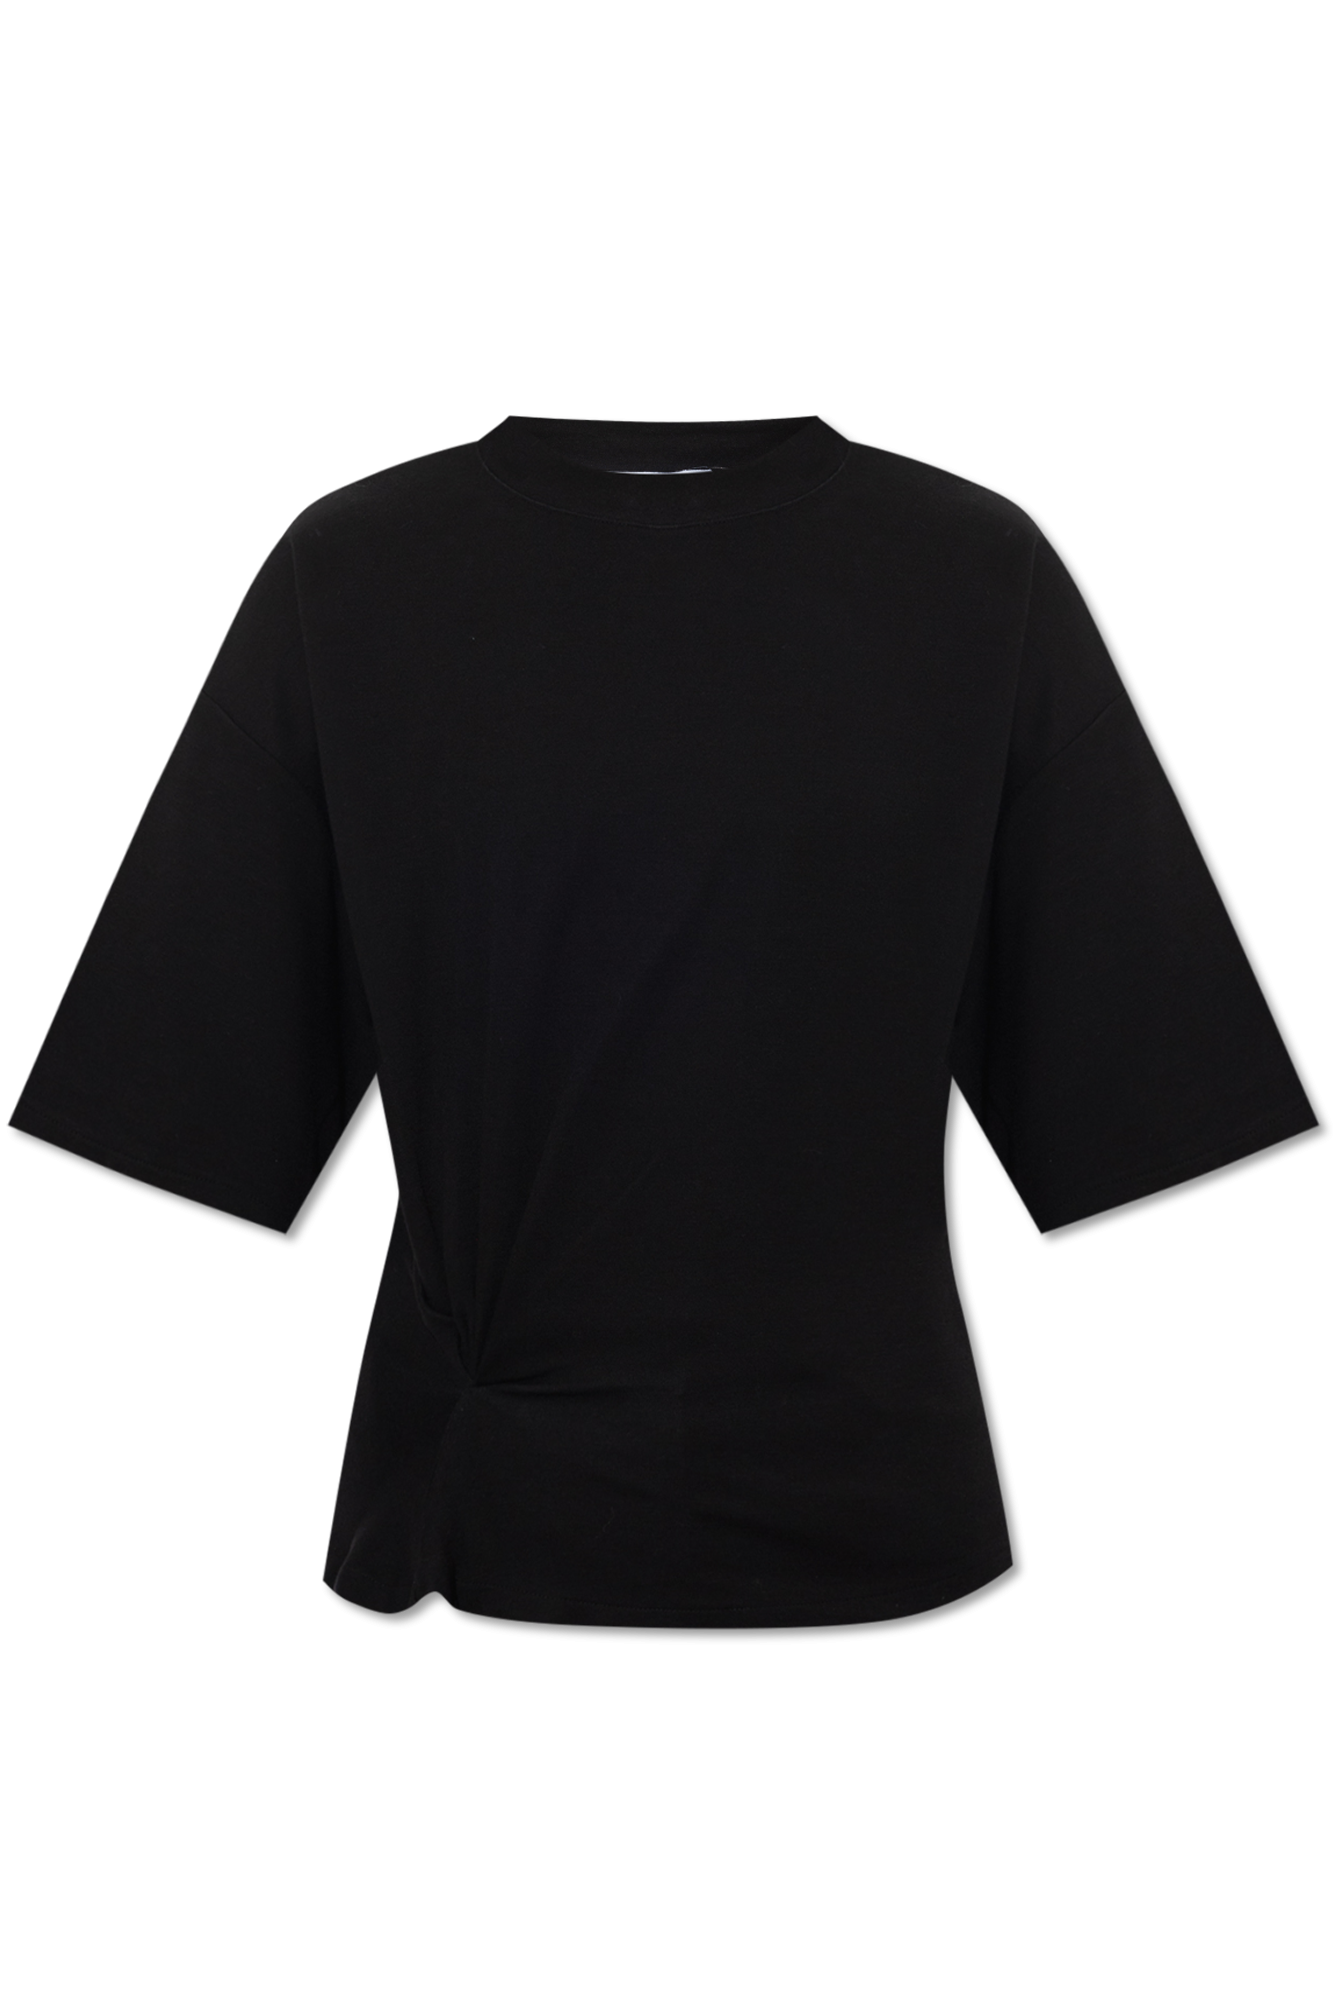 IetpShops Norway - Keep sweater T shirt this - Black refined crew with things - Iro \'Garcia\' white belts from